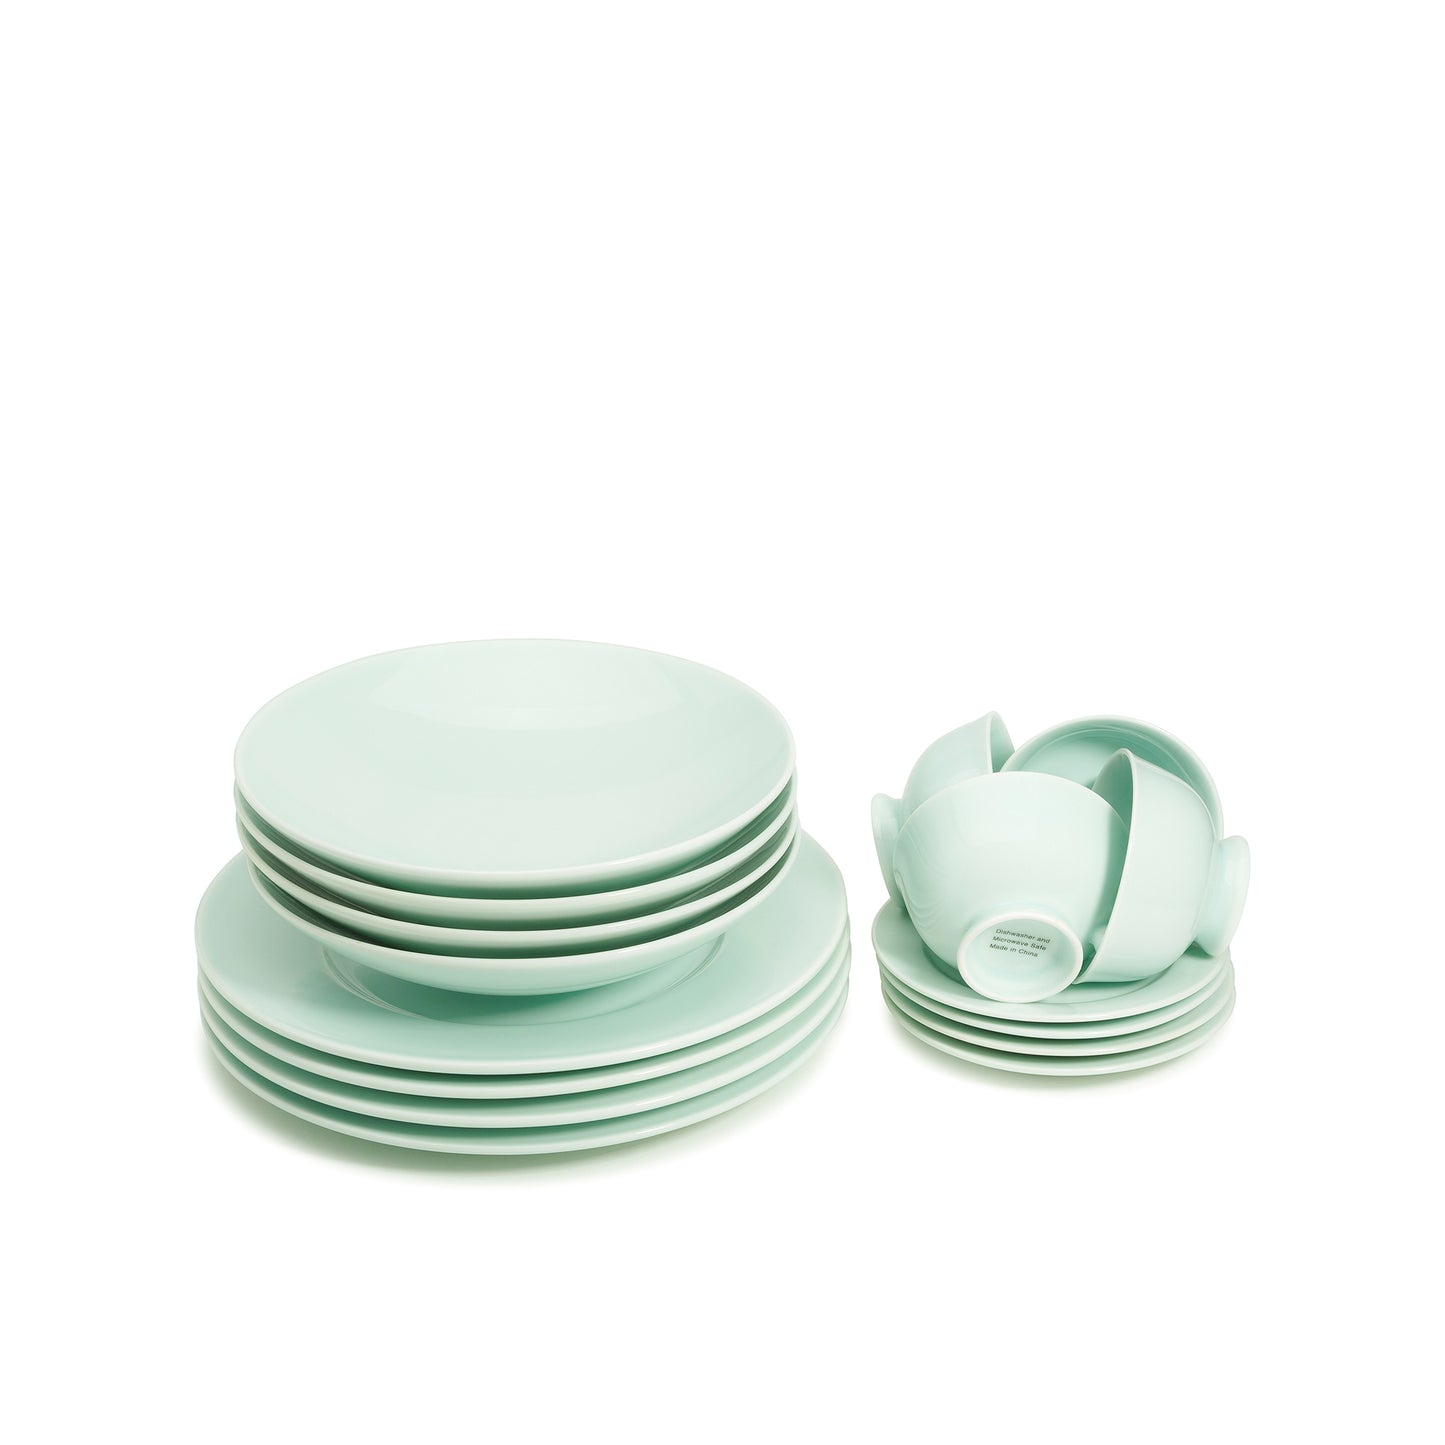 16 piece green celadon porcelain dinnerware set, dinner plates, 9" salad bowls, coffee cups and saucers, media 3 of 5